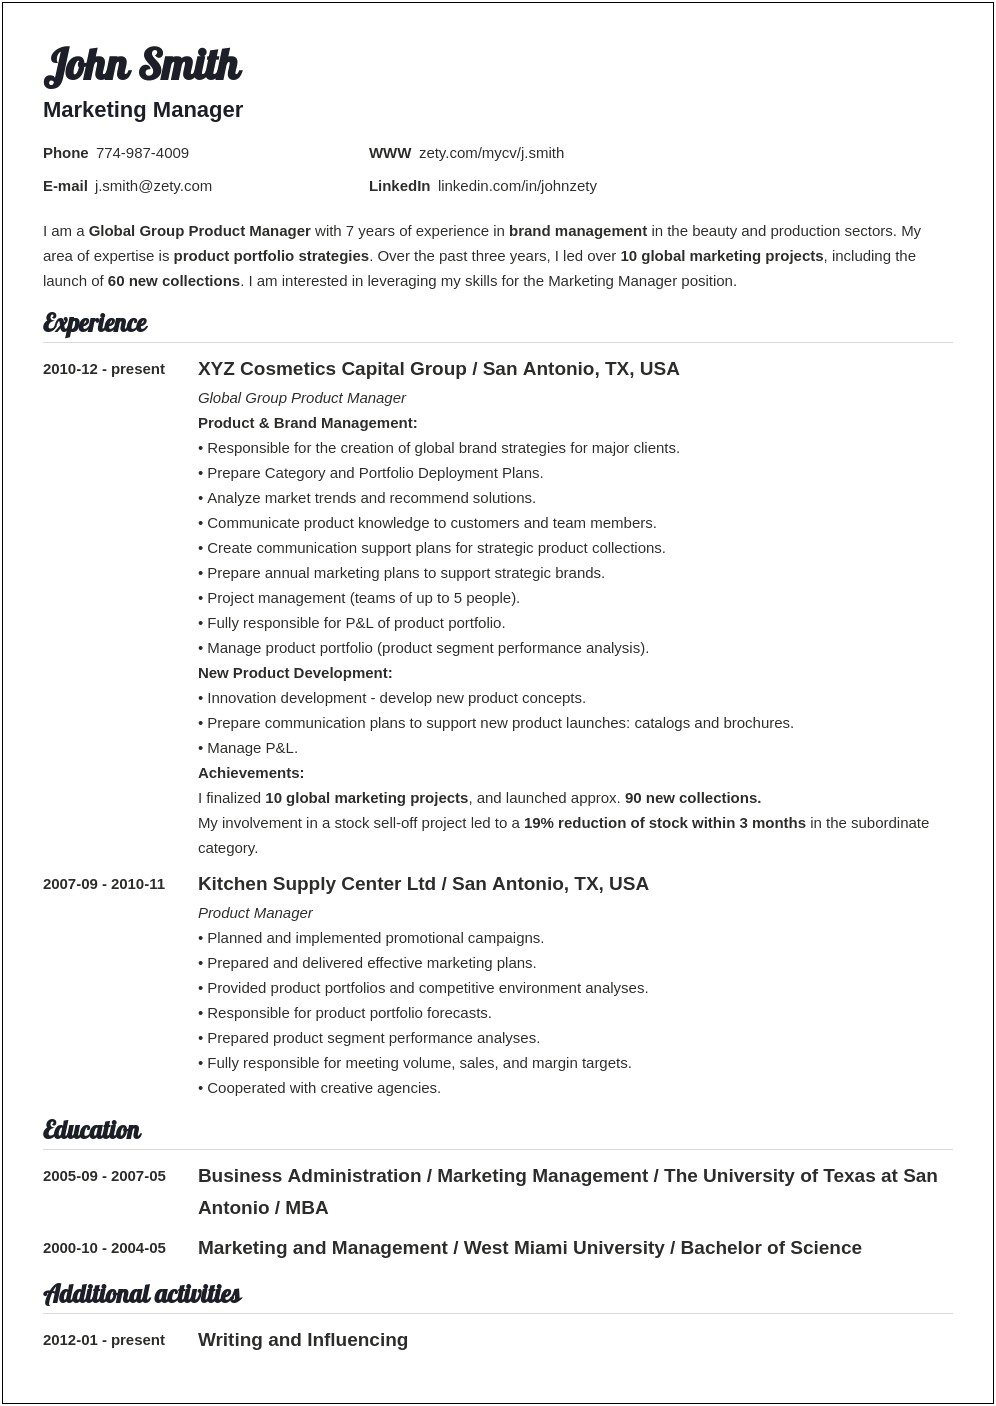 Listing Education On Resume With Professional Experience